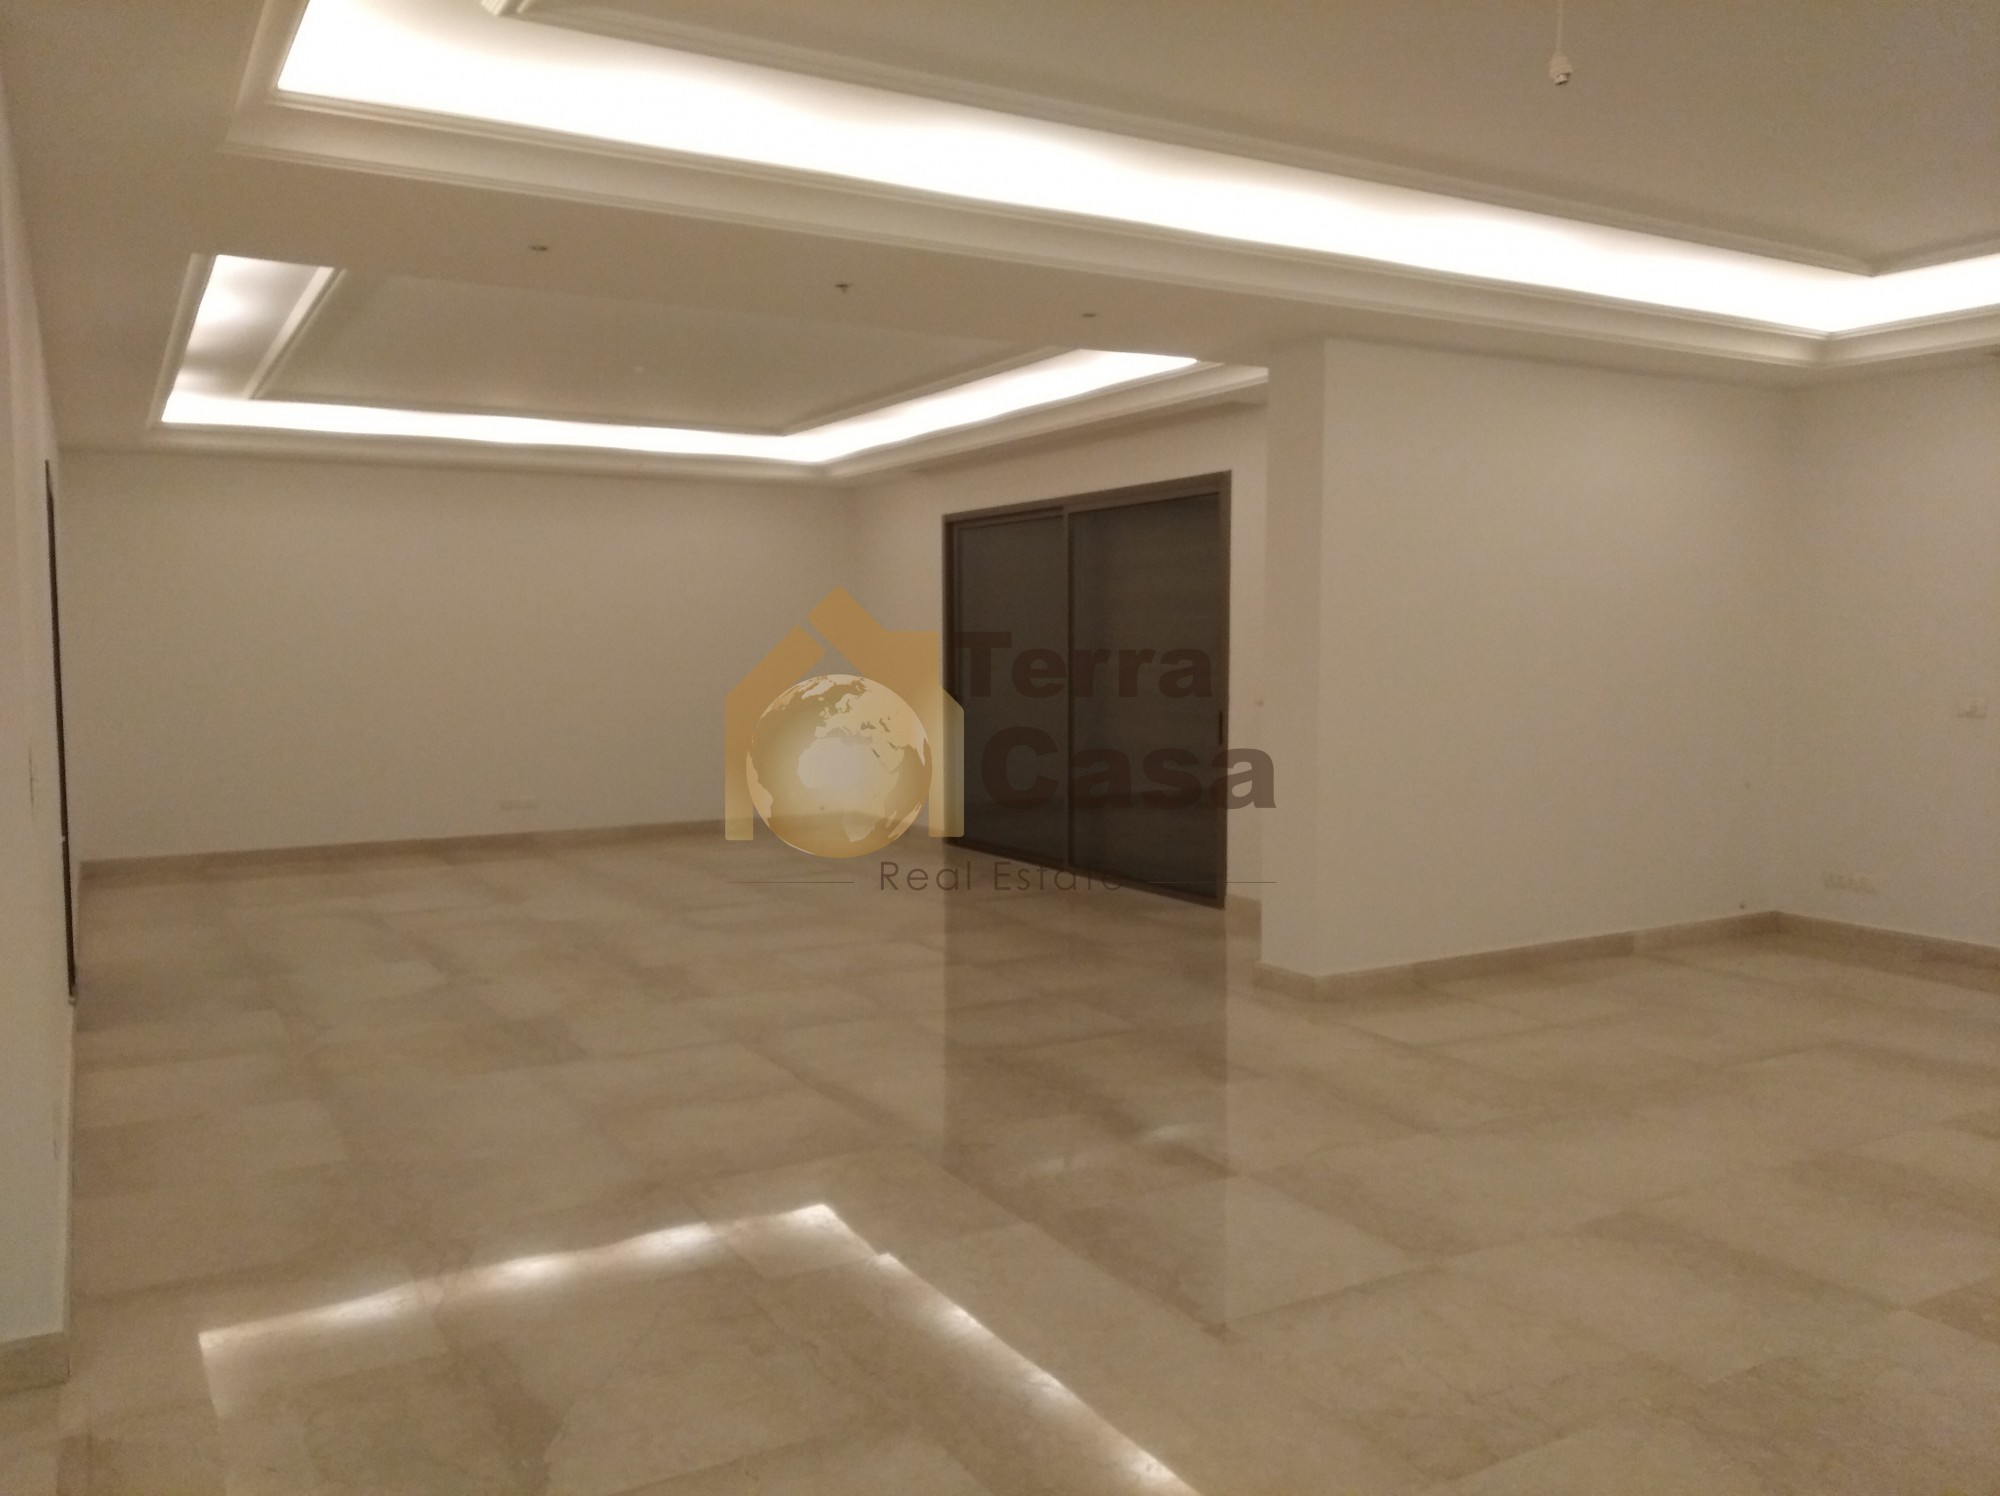 Apartment for rent in baabda brazilia brand new luxurious finishing.